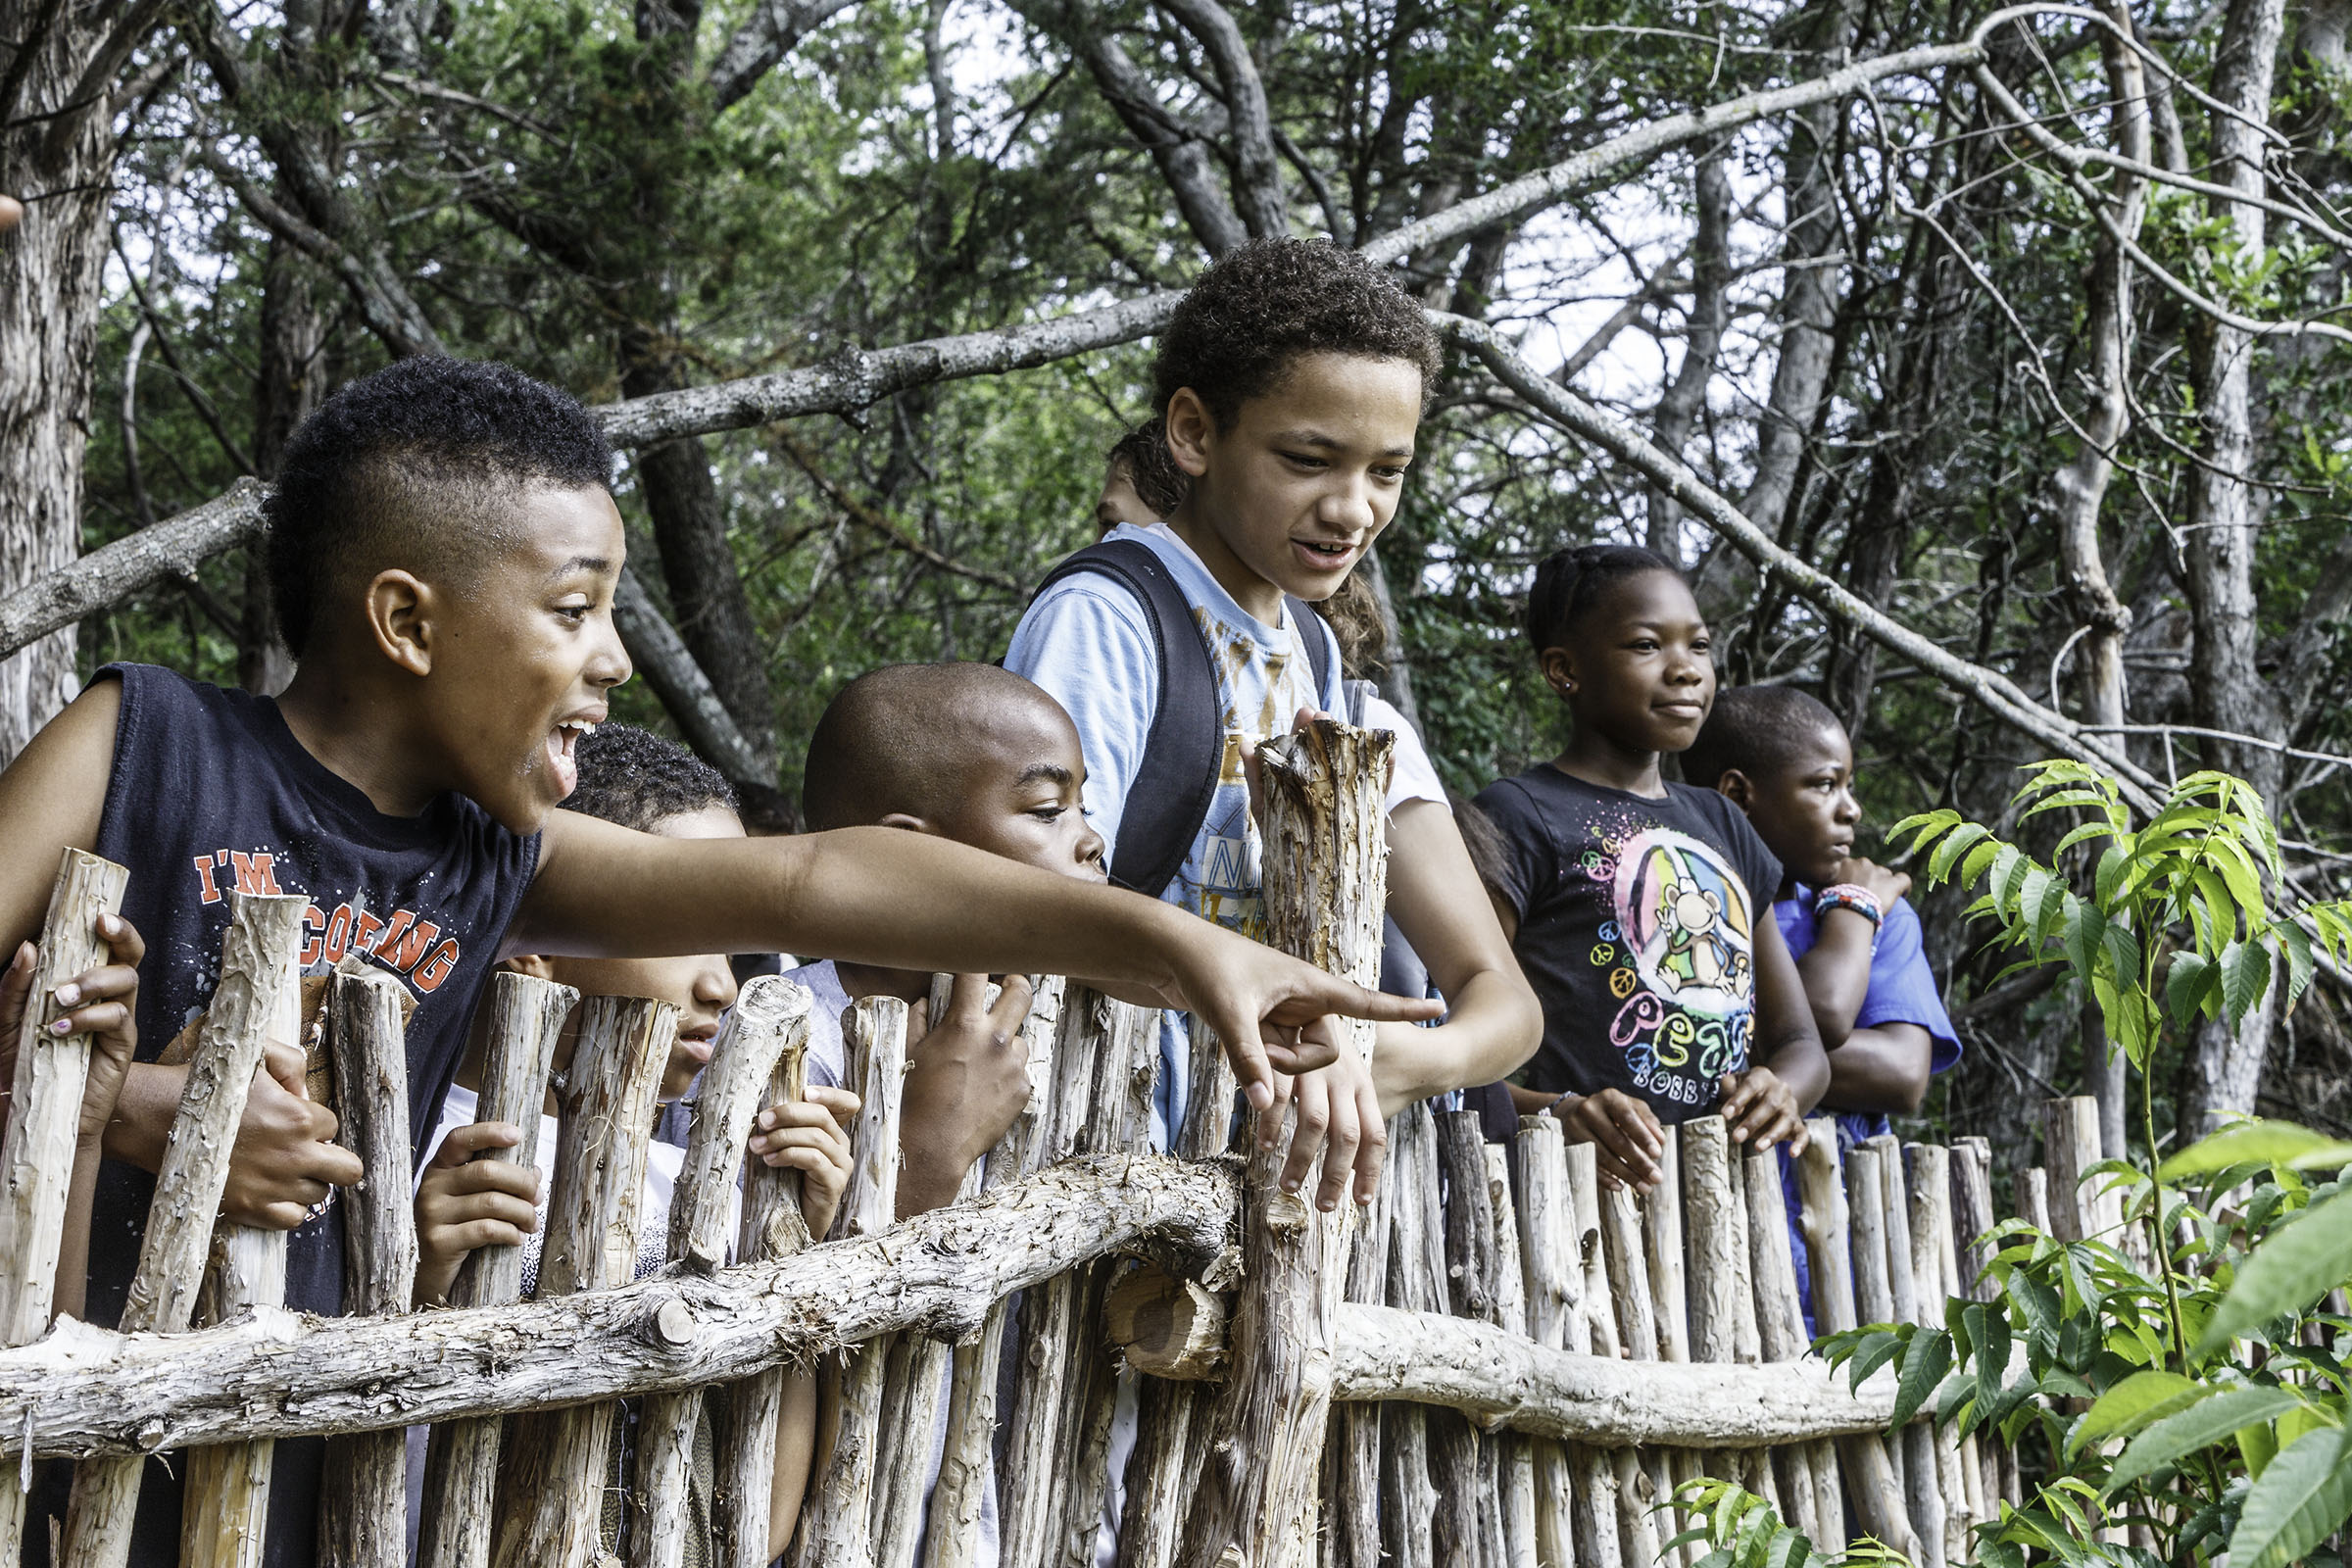 A group of young people lean over a wooden fence in a lush wooded environment